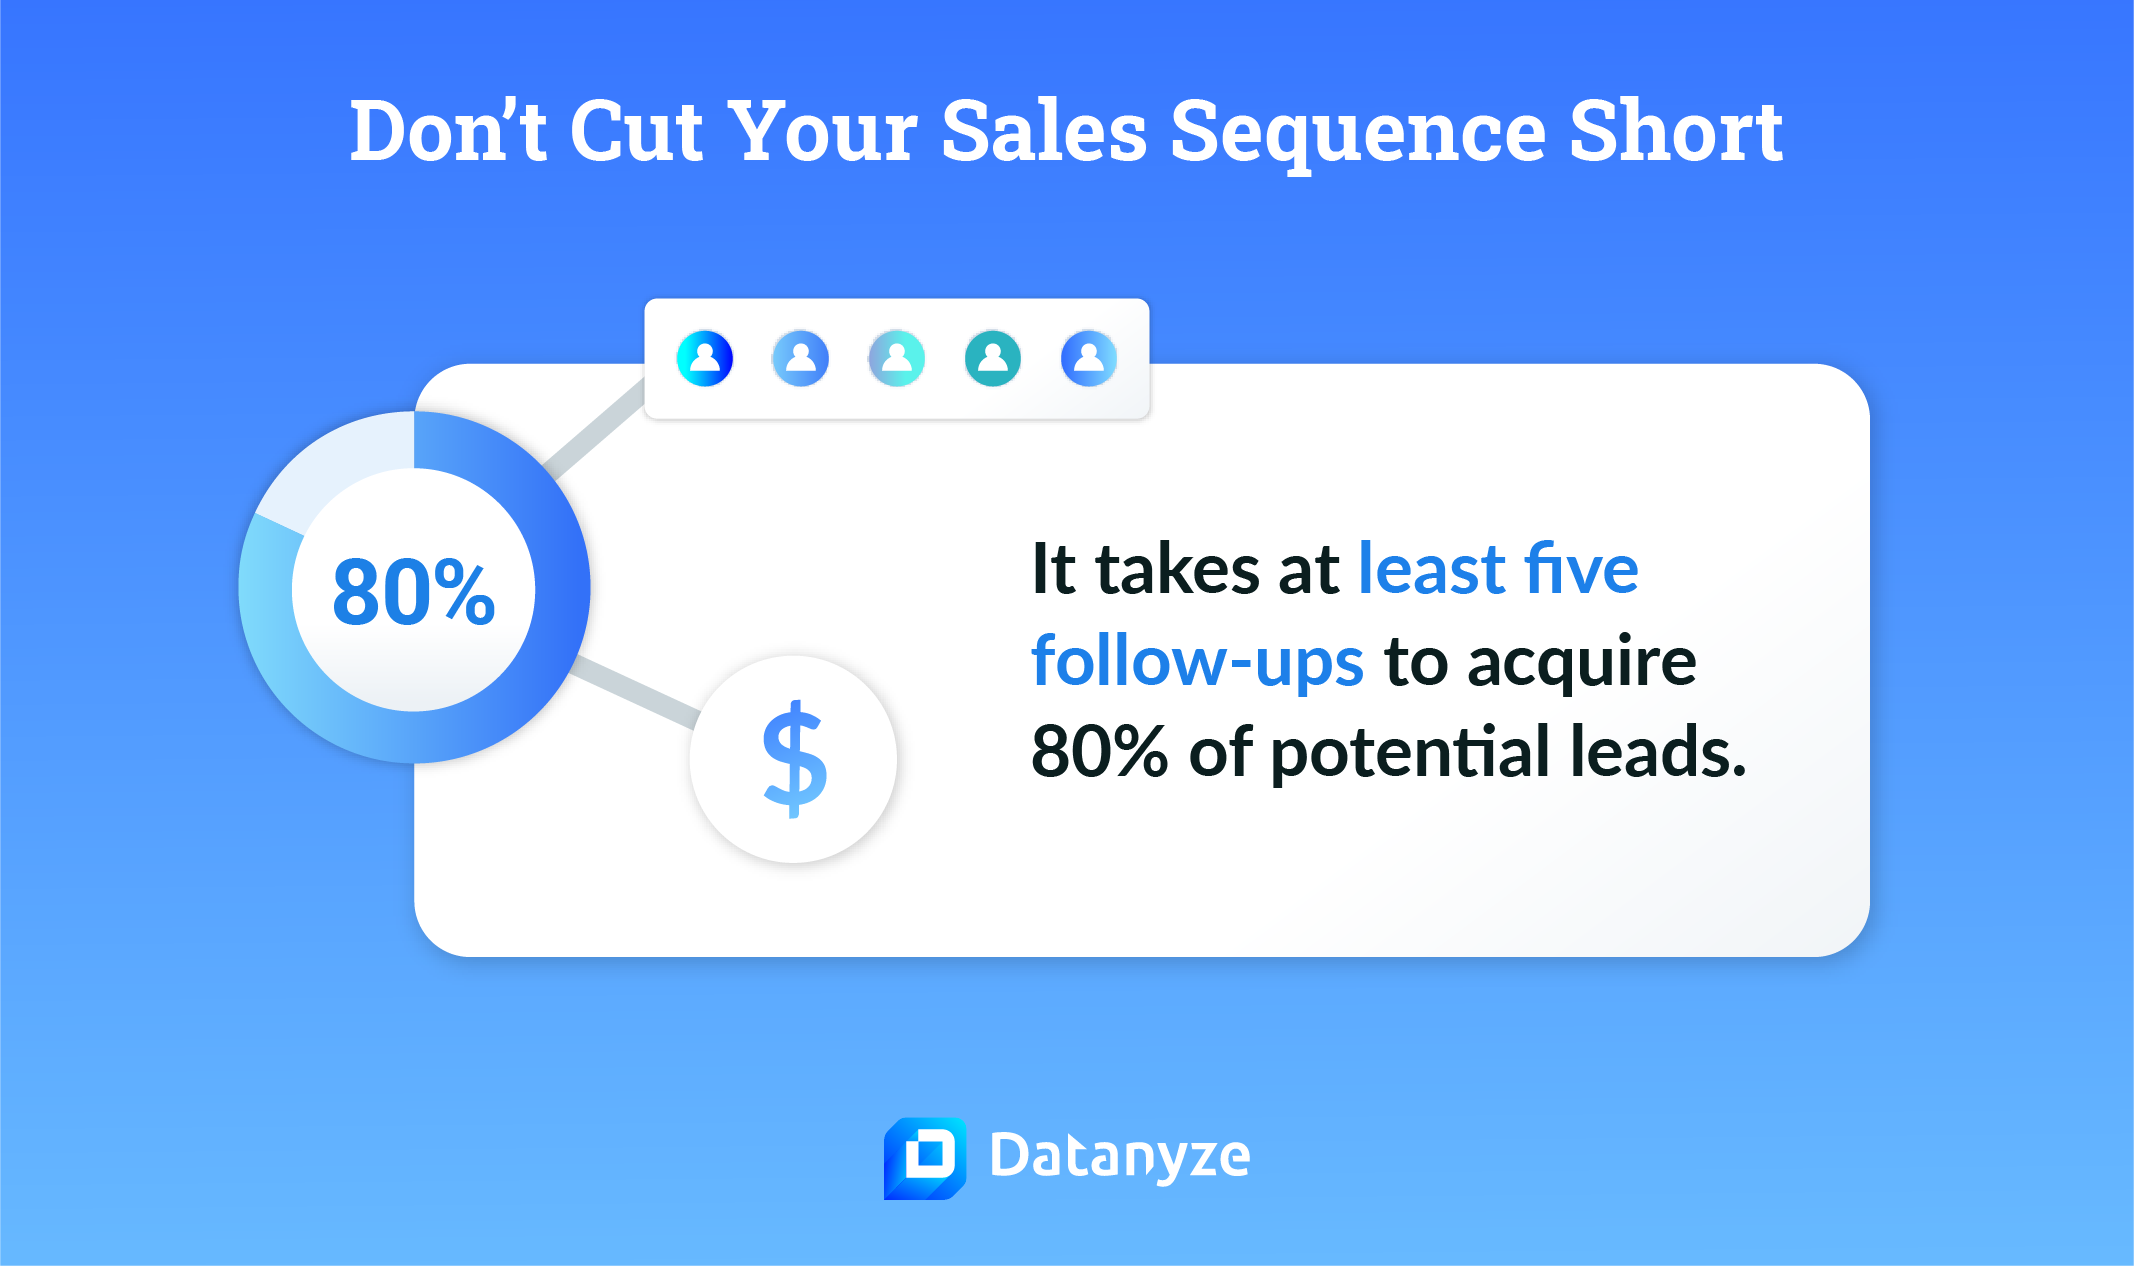 Don't cut your sales sequence short